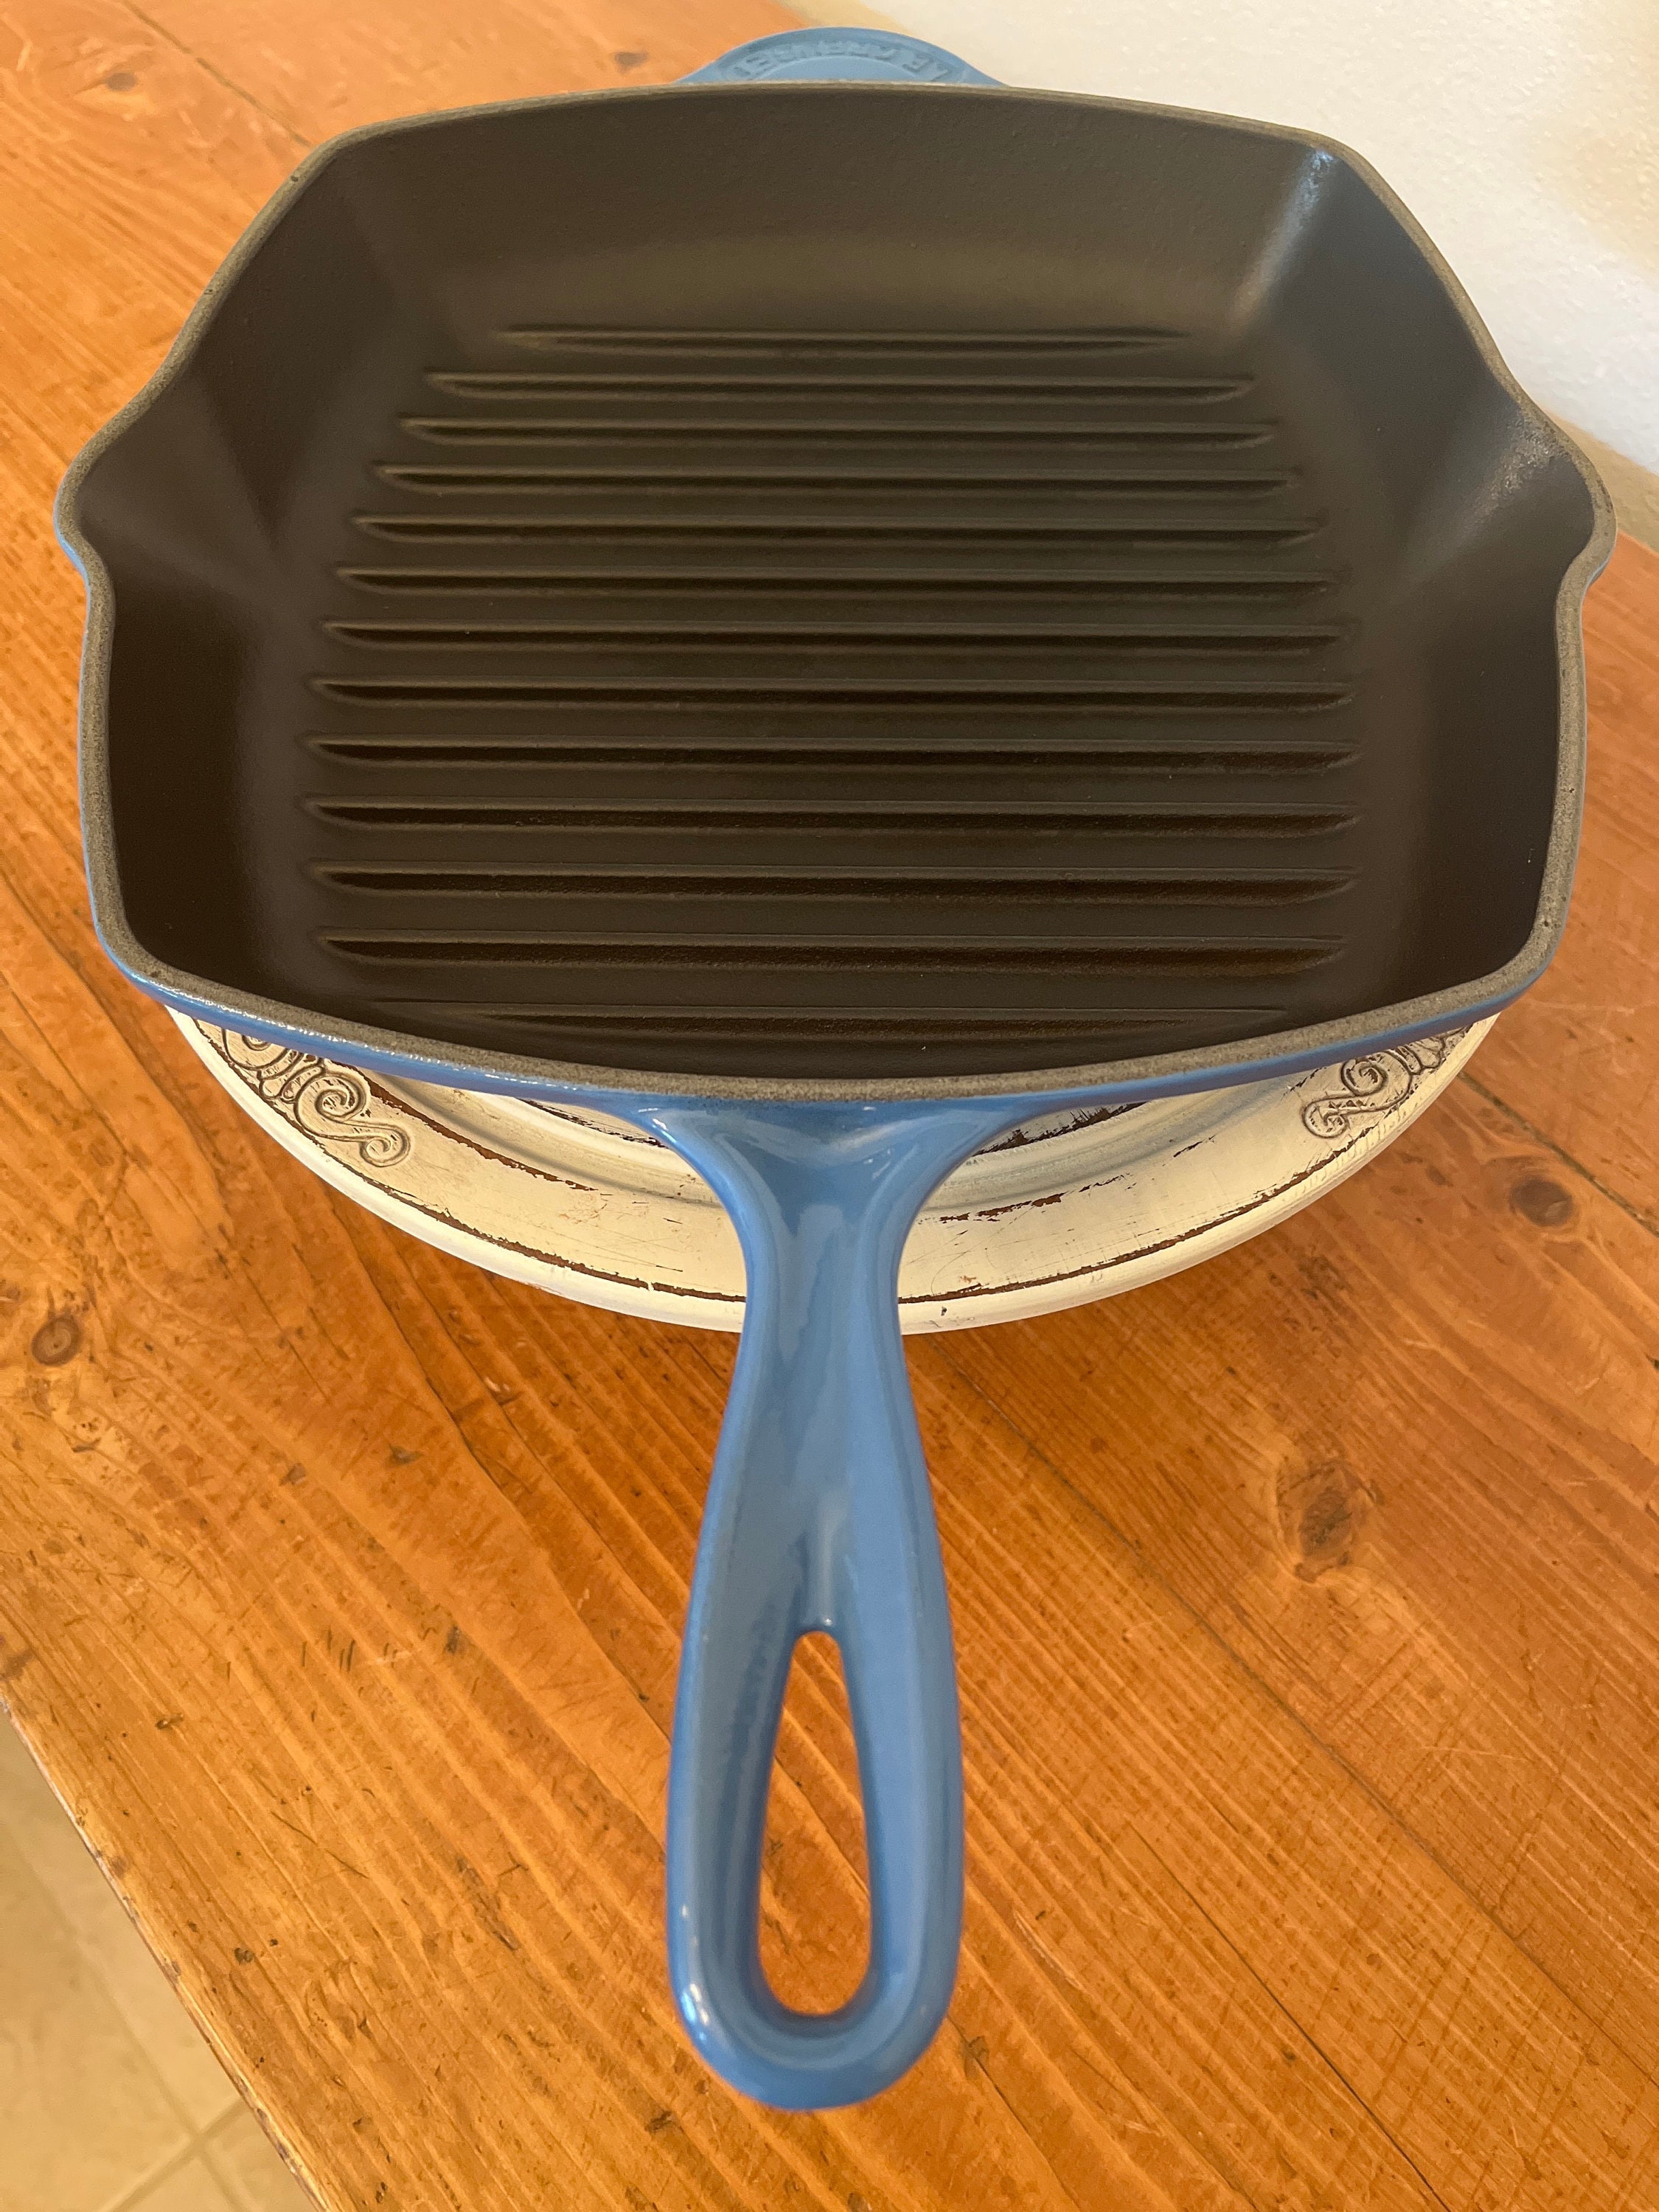 Le Creuset Square Grill Pan - Marseille - Browns Kitchen